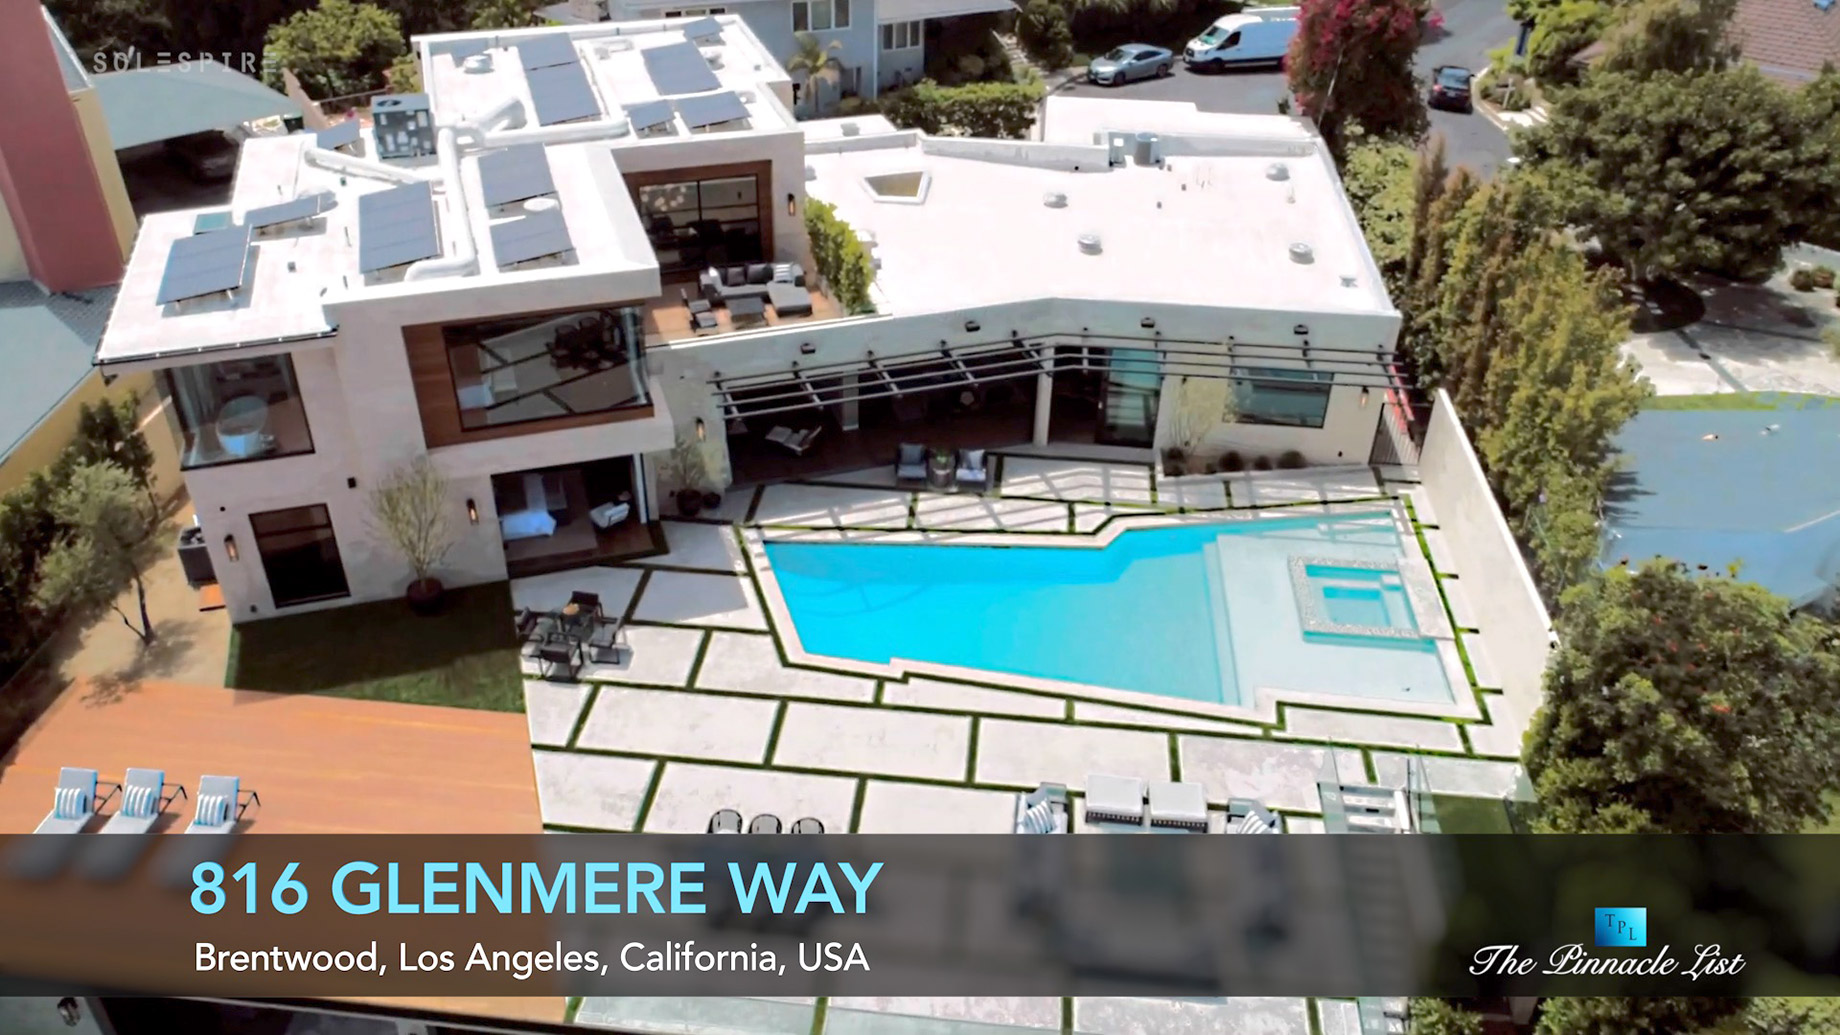 816 Glenmere Way, Brentwood, Los Angeles, CA, USA - Luxury Real Estate - Video